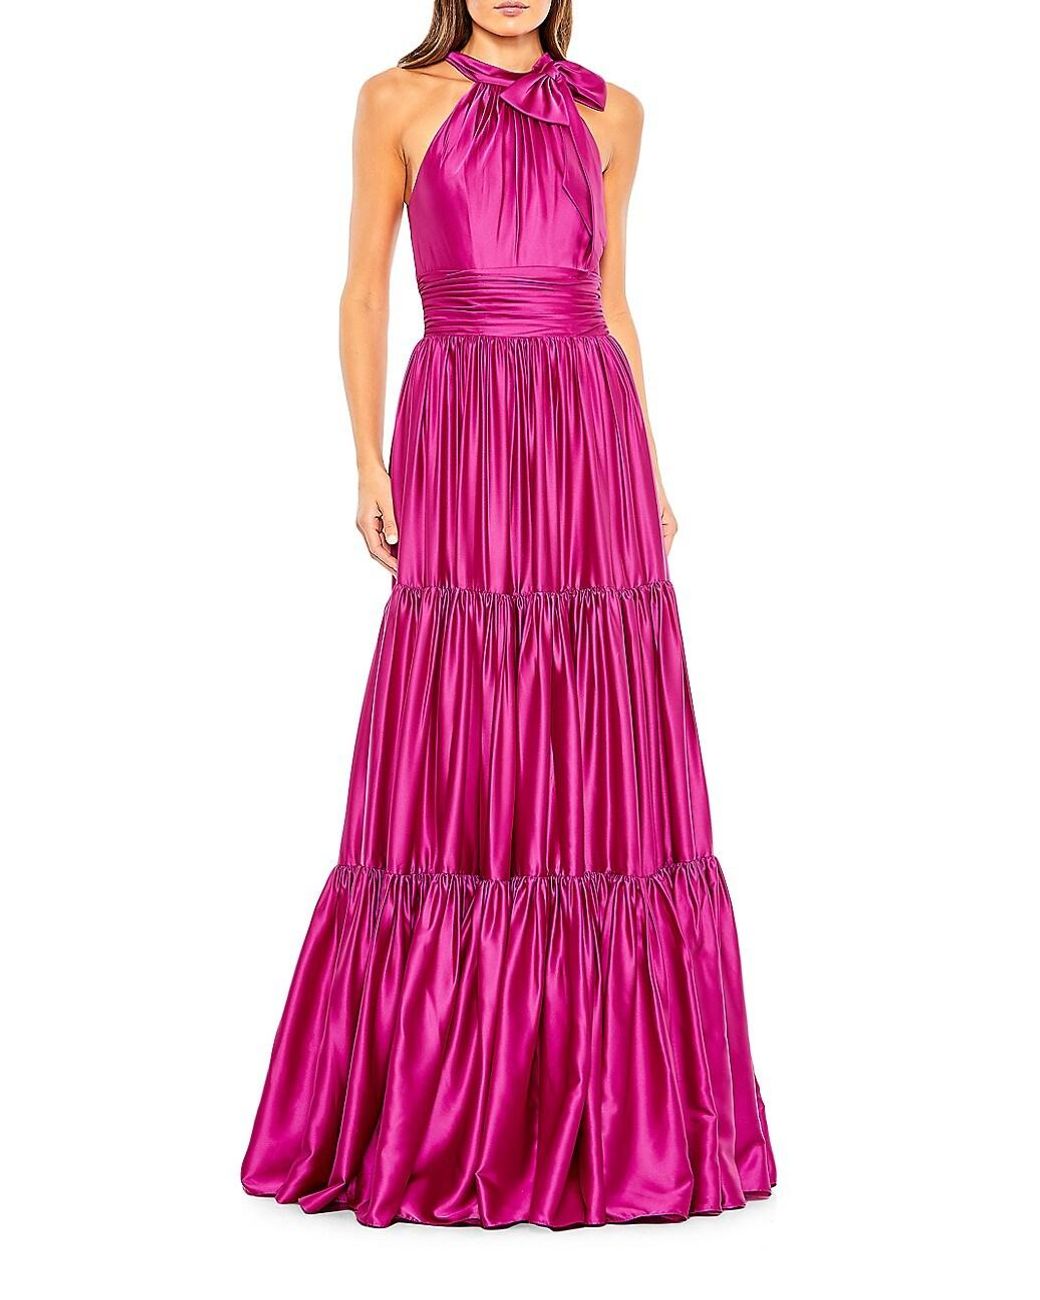 Mac Duggal Chiffon Tiered Bow Neck Gown in Fuchsia (Pink) | Lyst